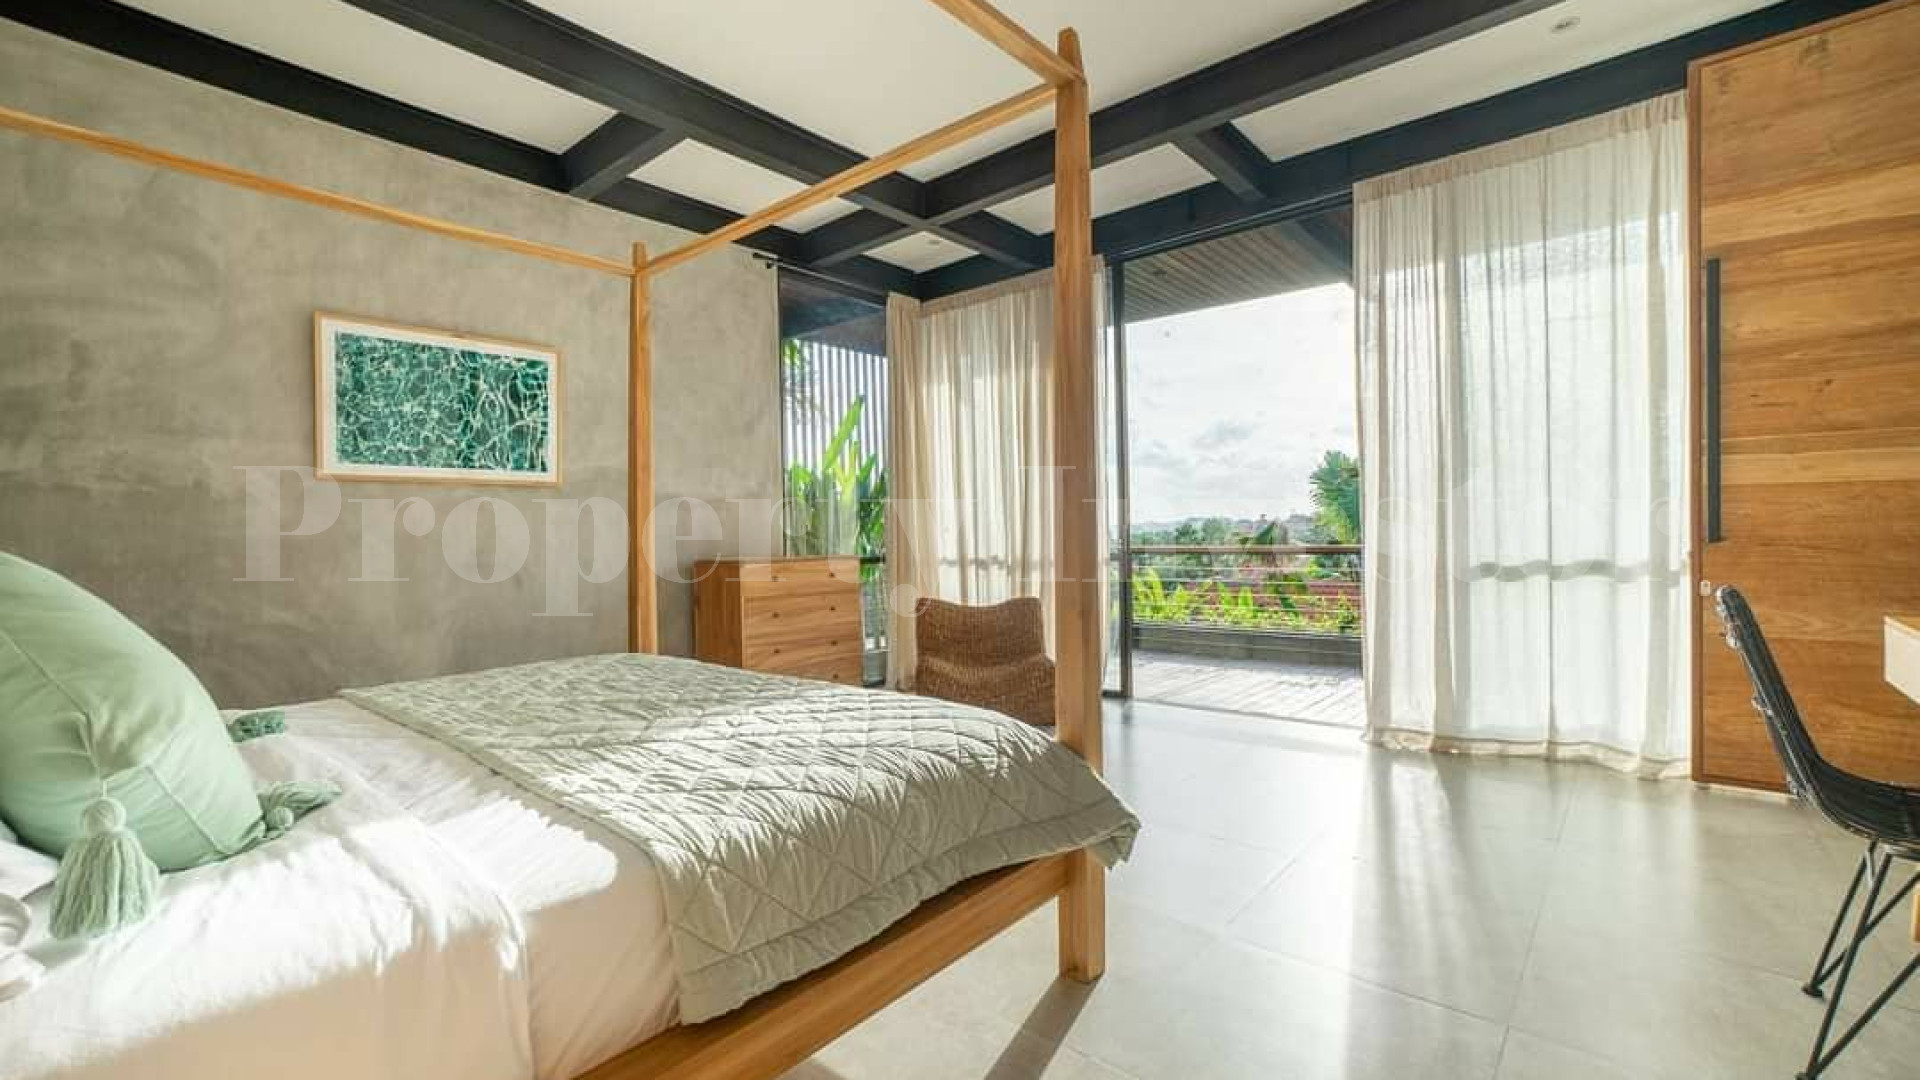 Stunning 5 Bedroom Contemporary Villa with Commercial Space for Sale in Berawa, Canggu, Bali